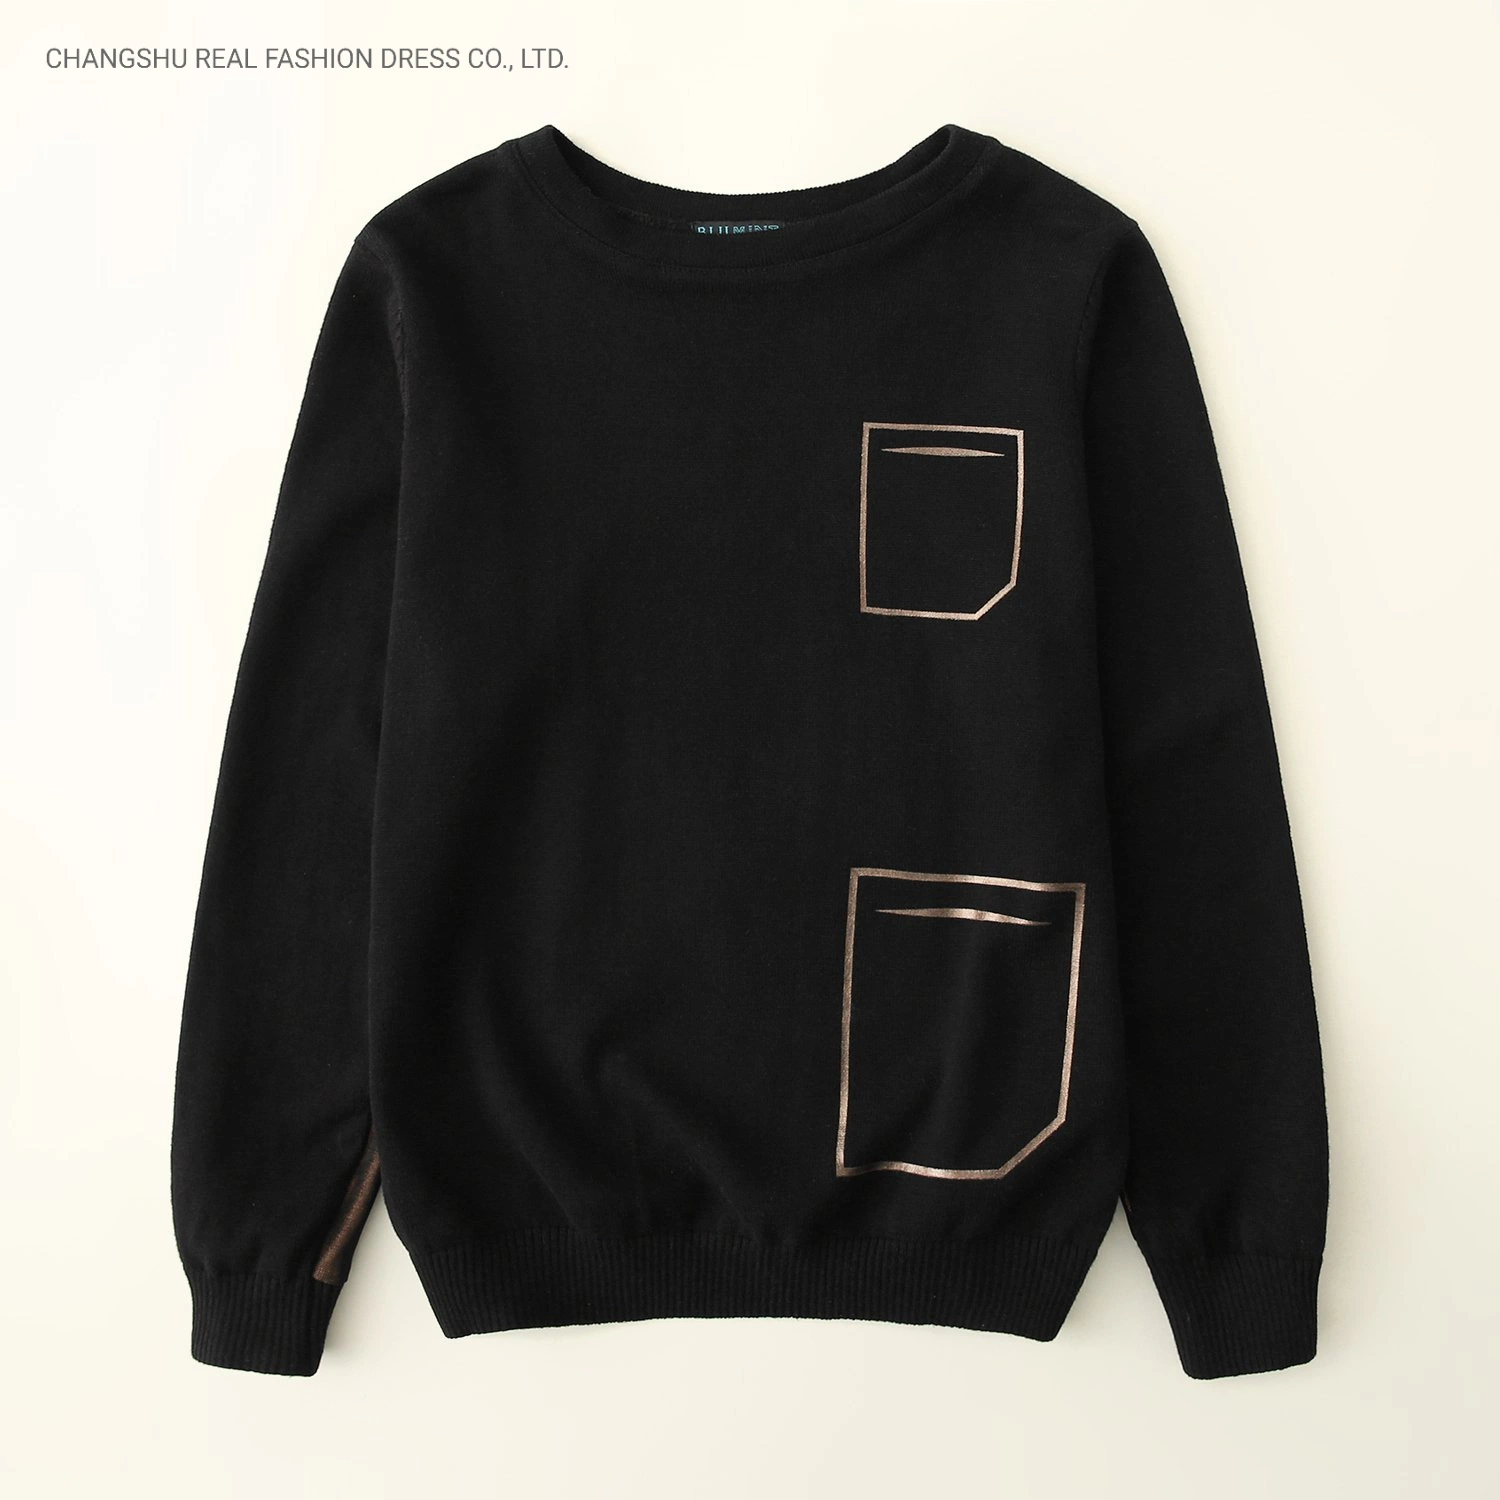 Boy Children Clothing Toddle Kids Knitted Black Sweater Wear with Gold Foil Pockets at Front